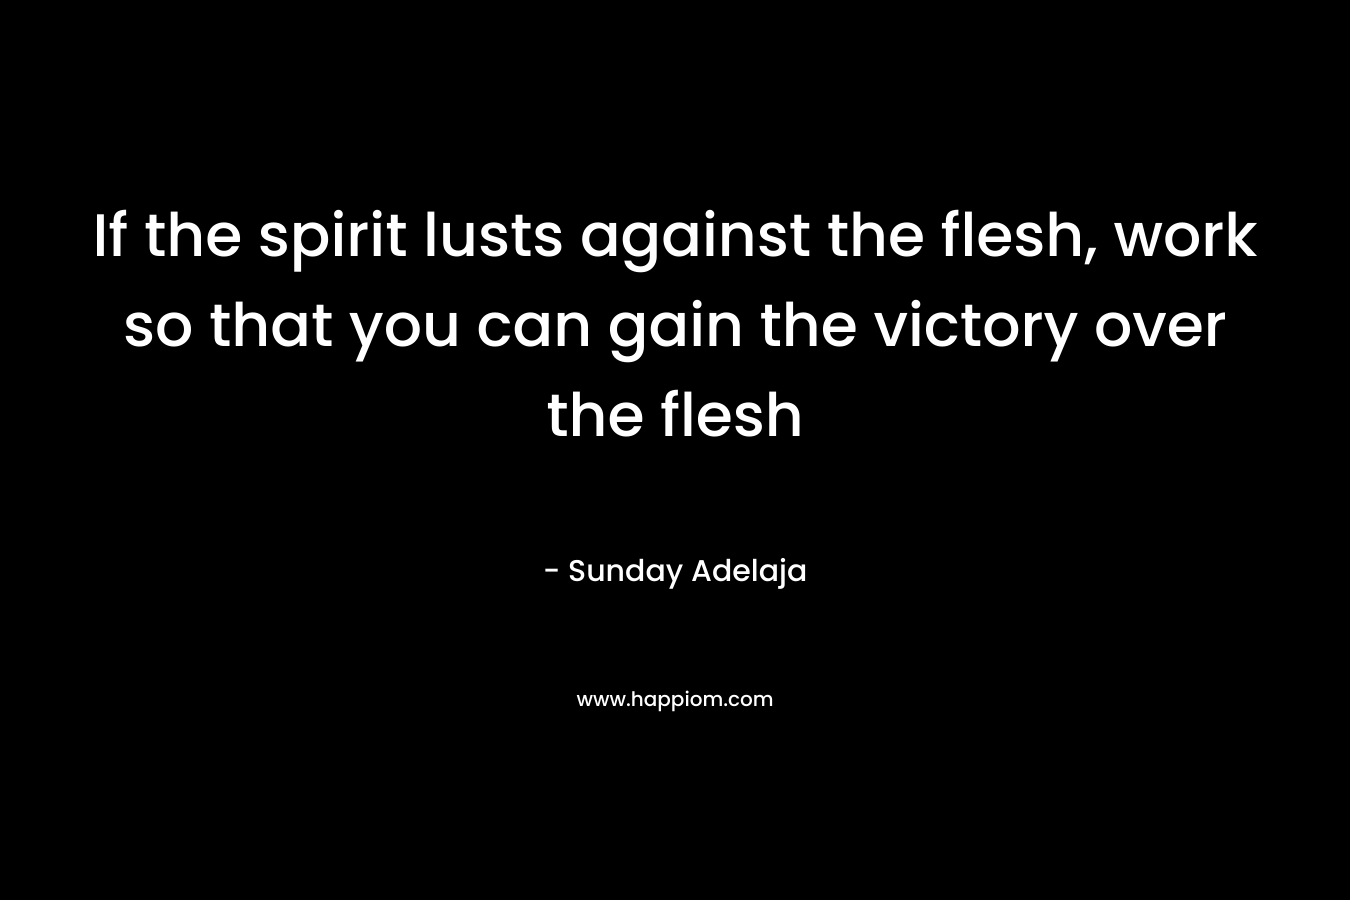 If the spirit lusts against the flesh, work so that you can gain the victory over the flesh